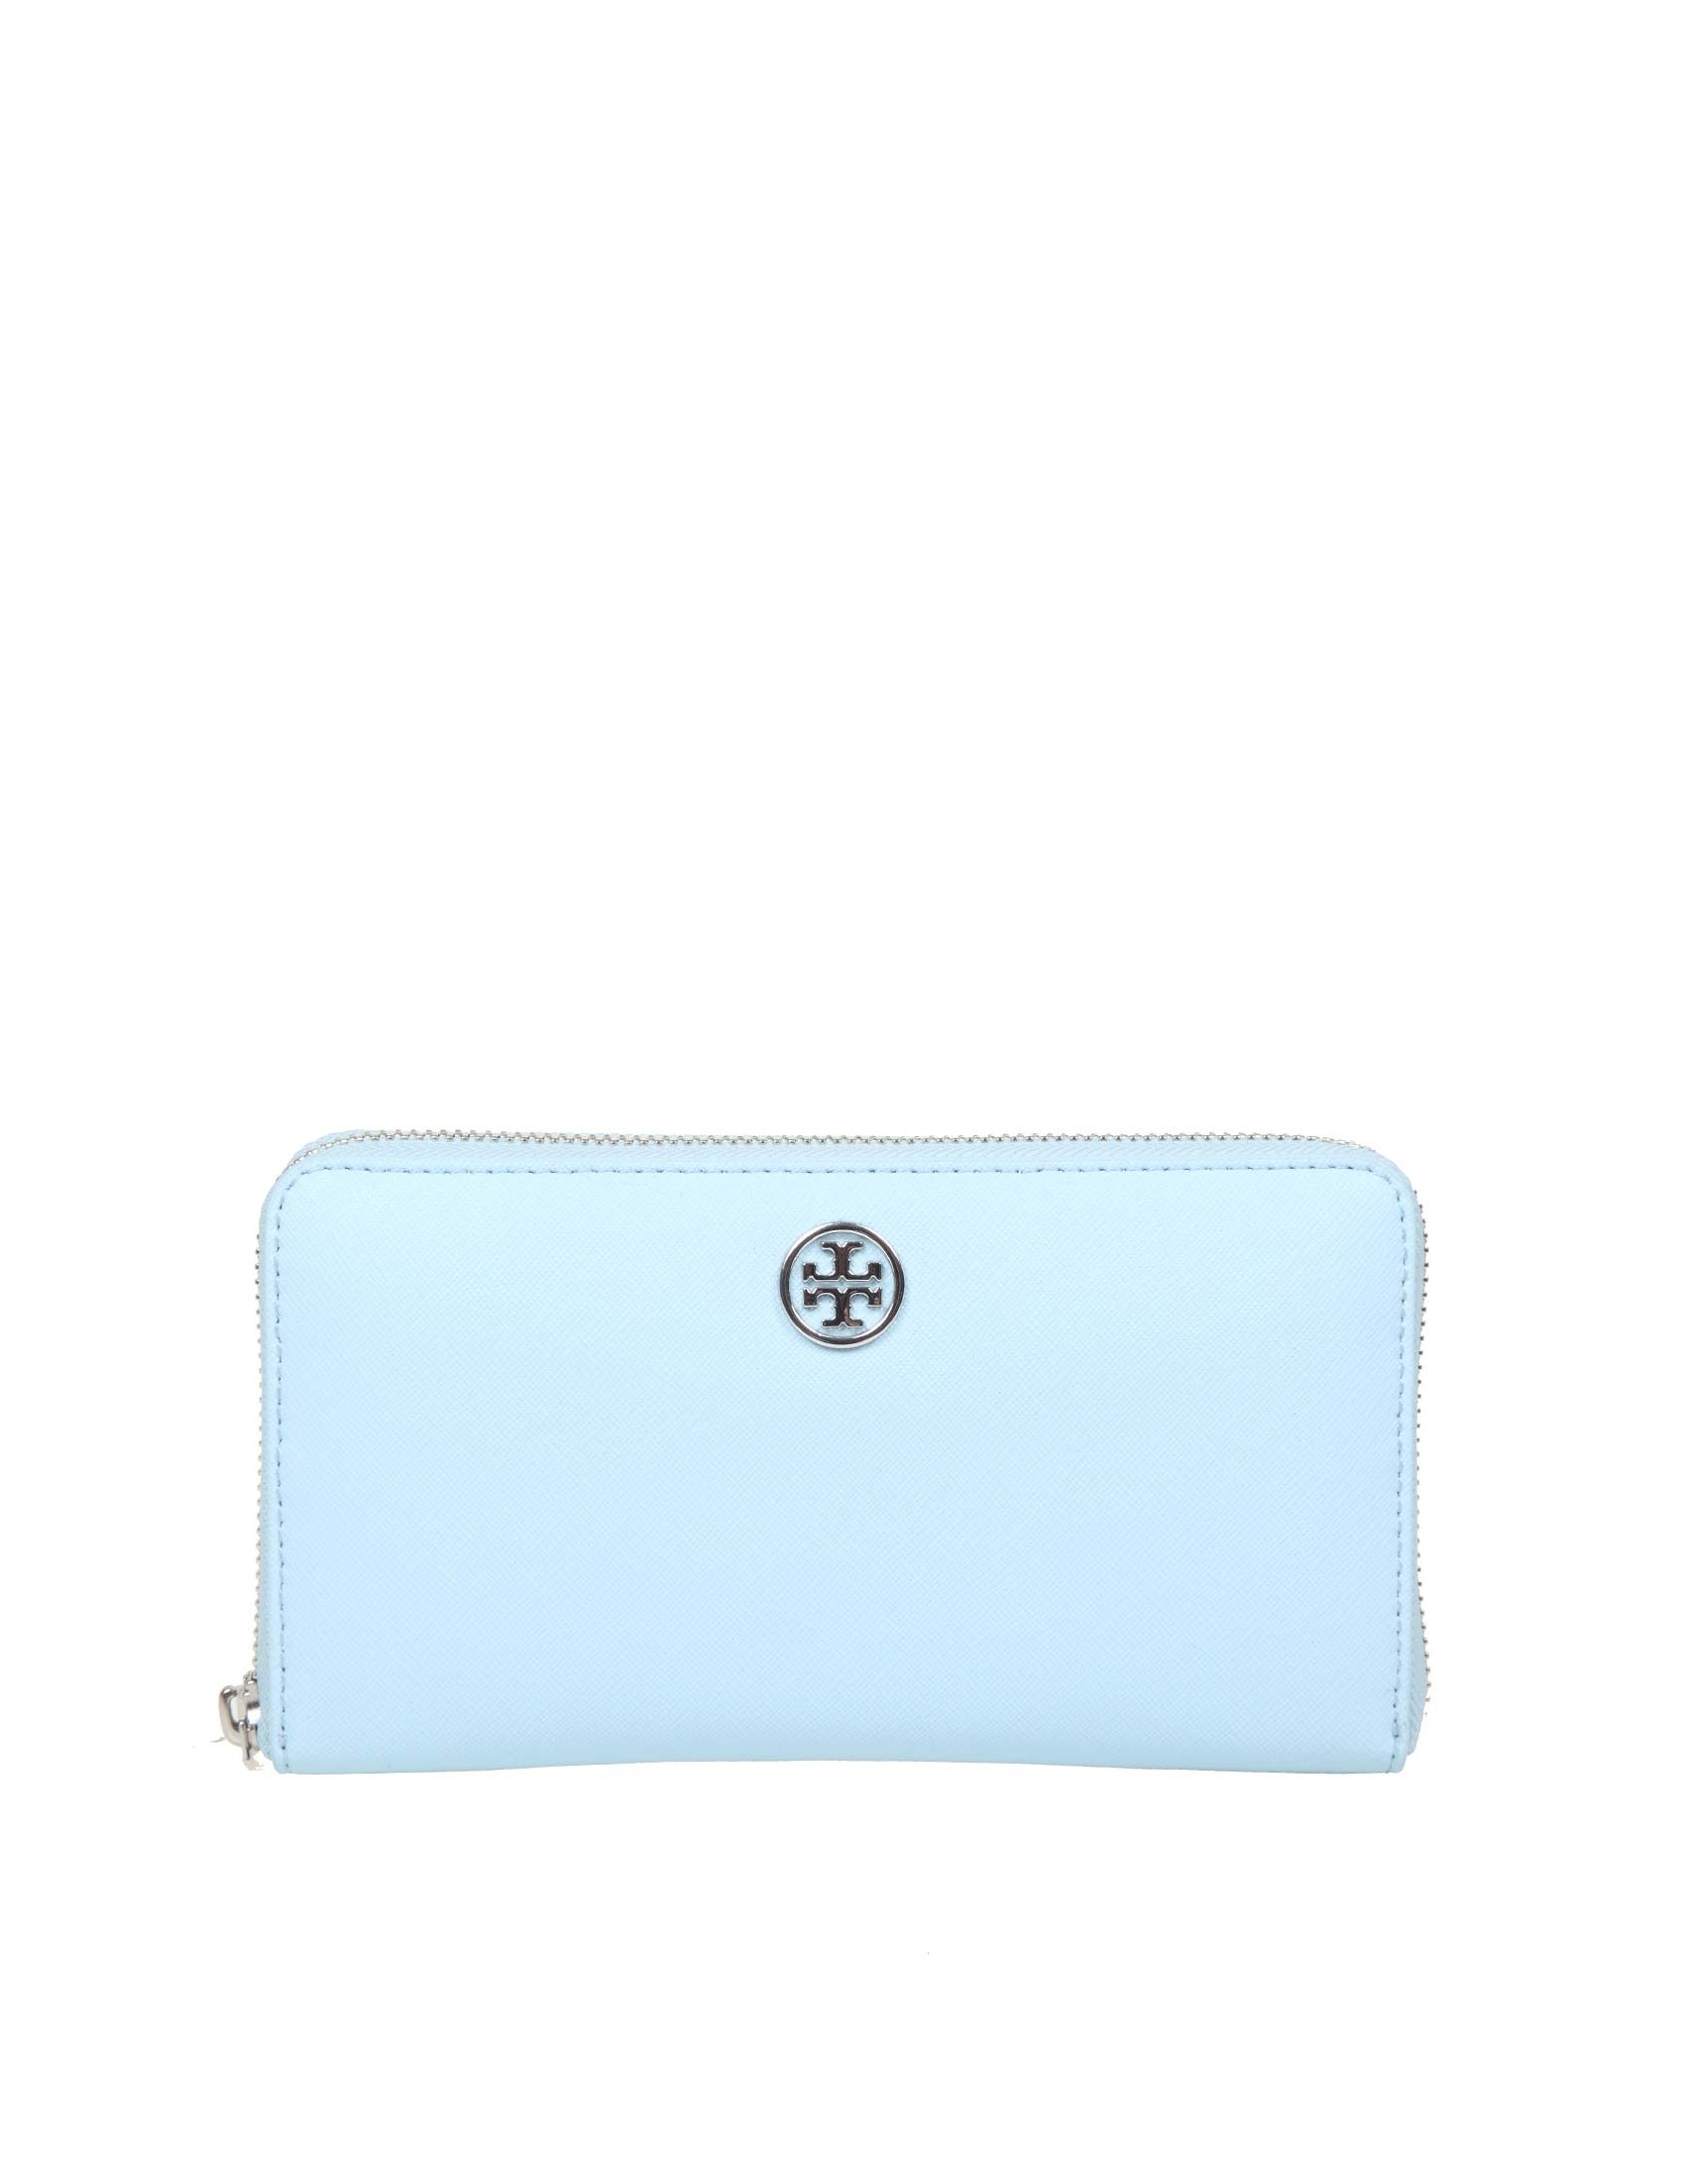 TORY BURCH ROBINSON WALLET IN LIGHT BLUE LEATHER